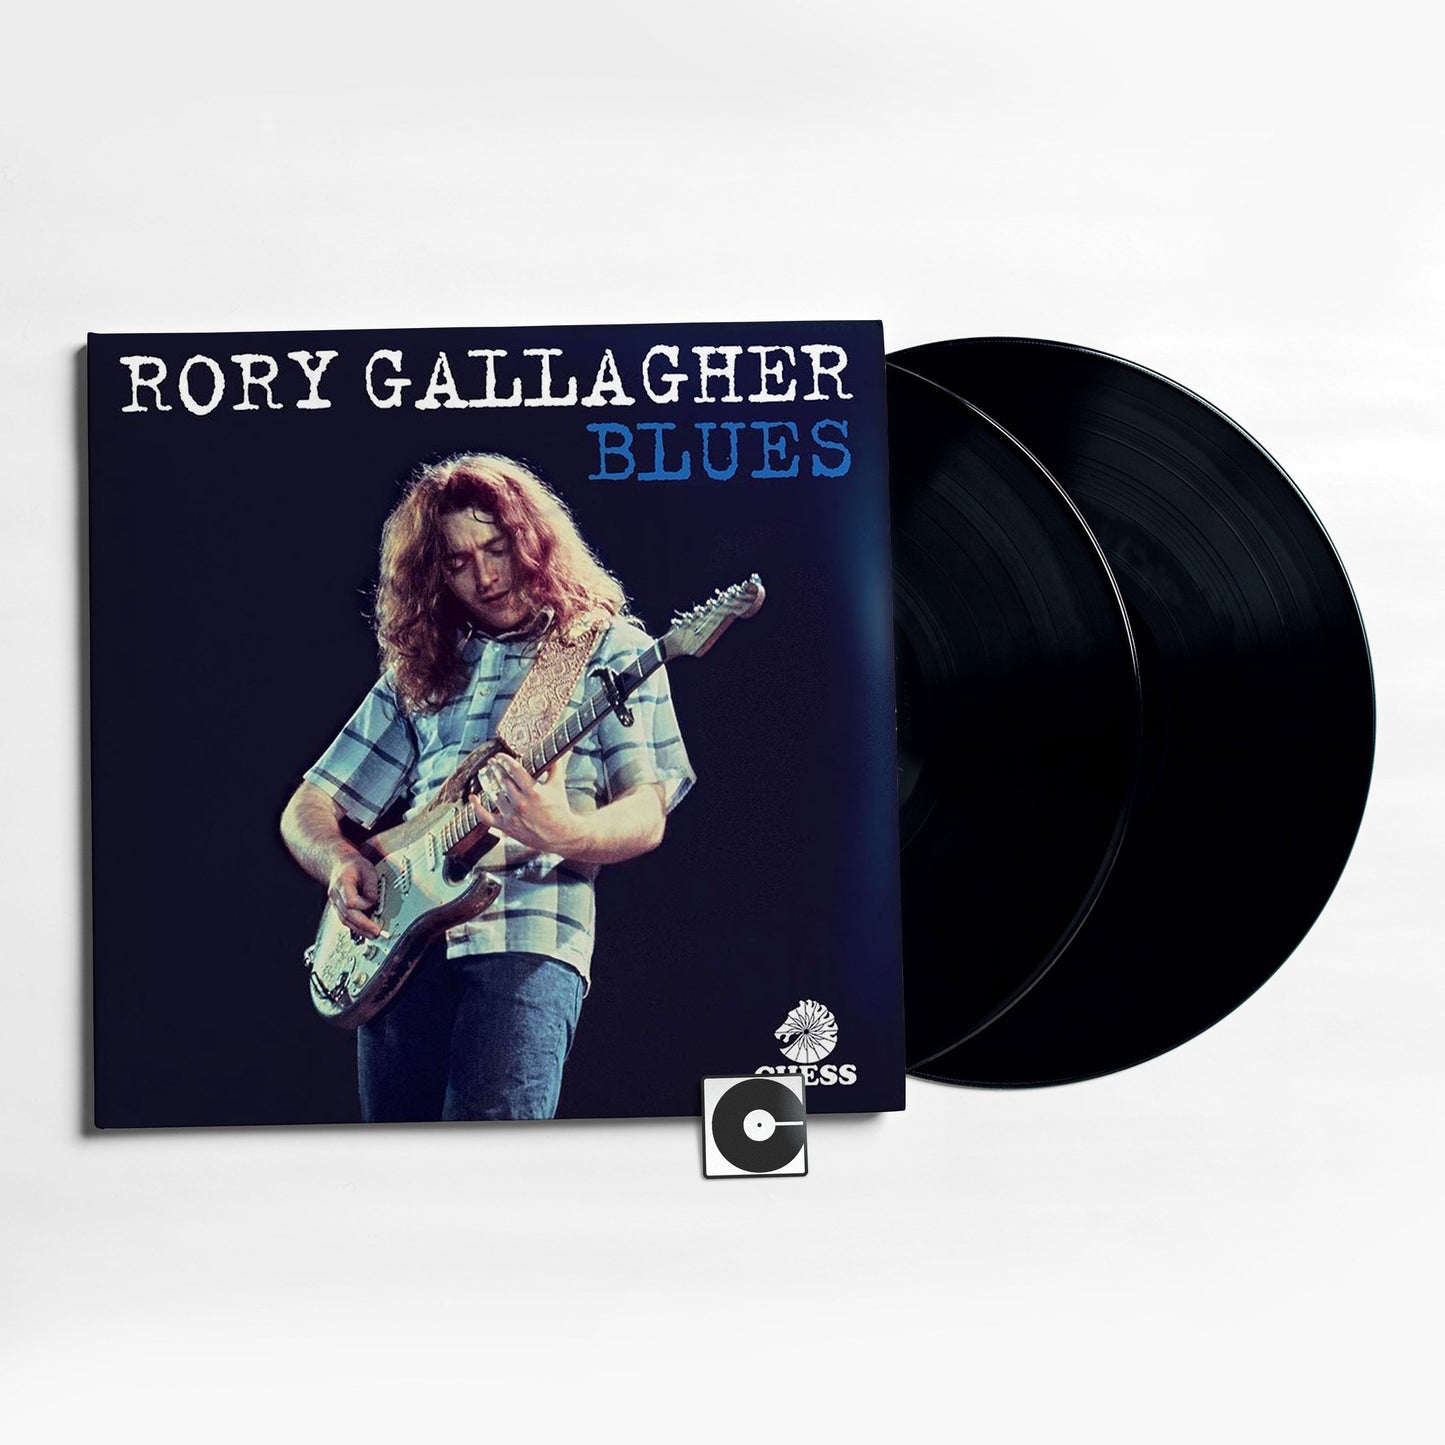 Rory Gallagher - "Blues"